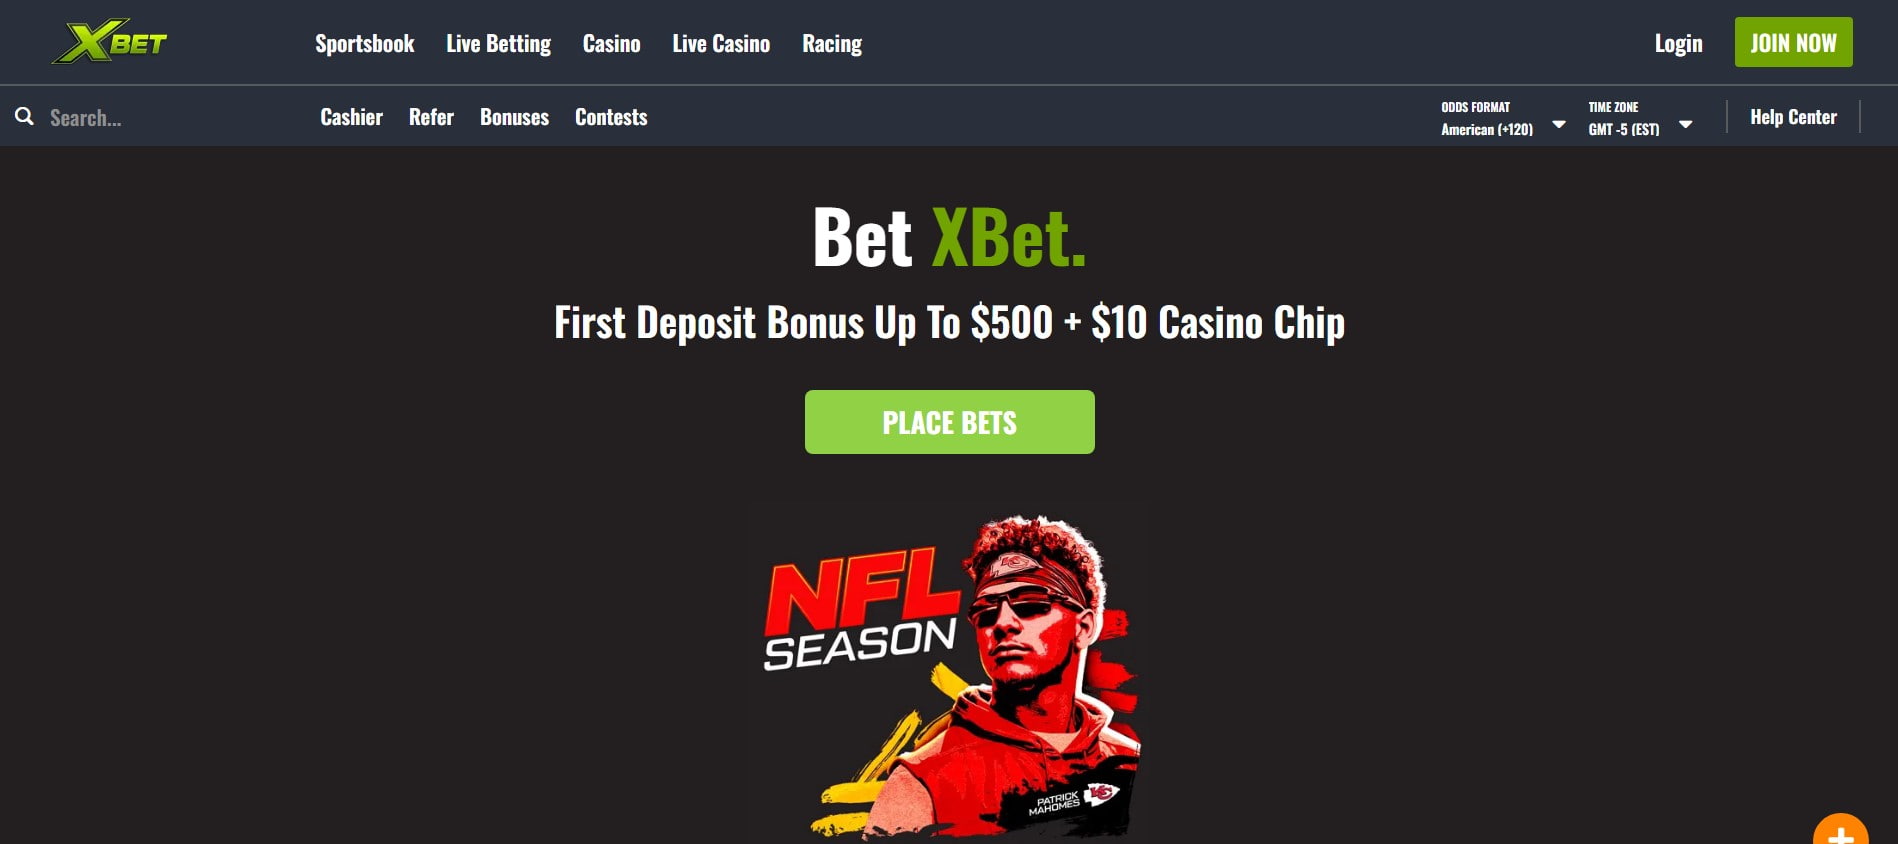 xbet homepage